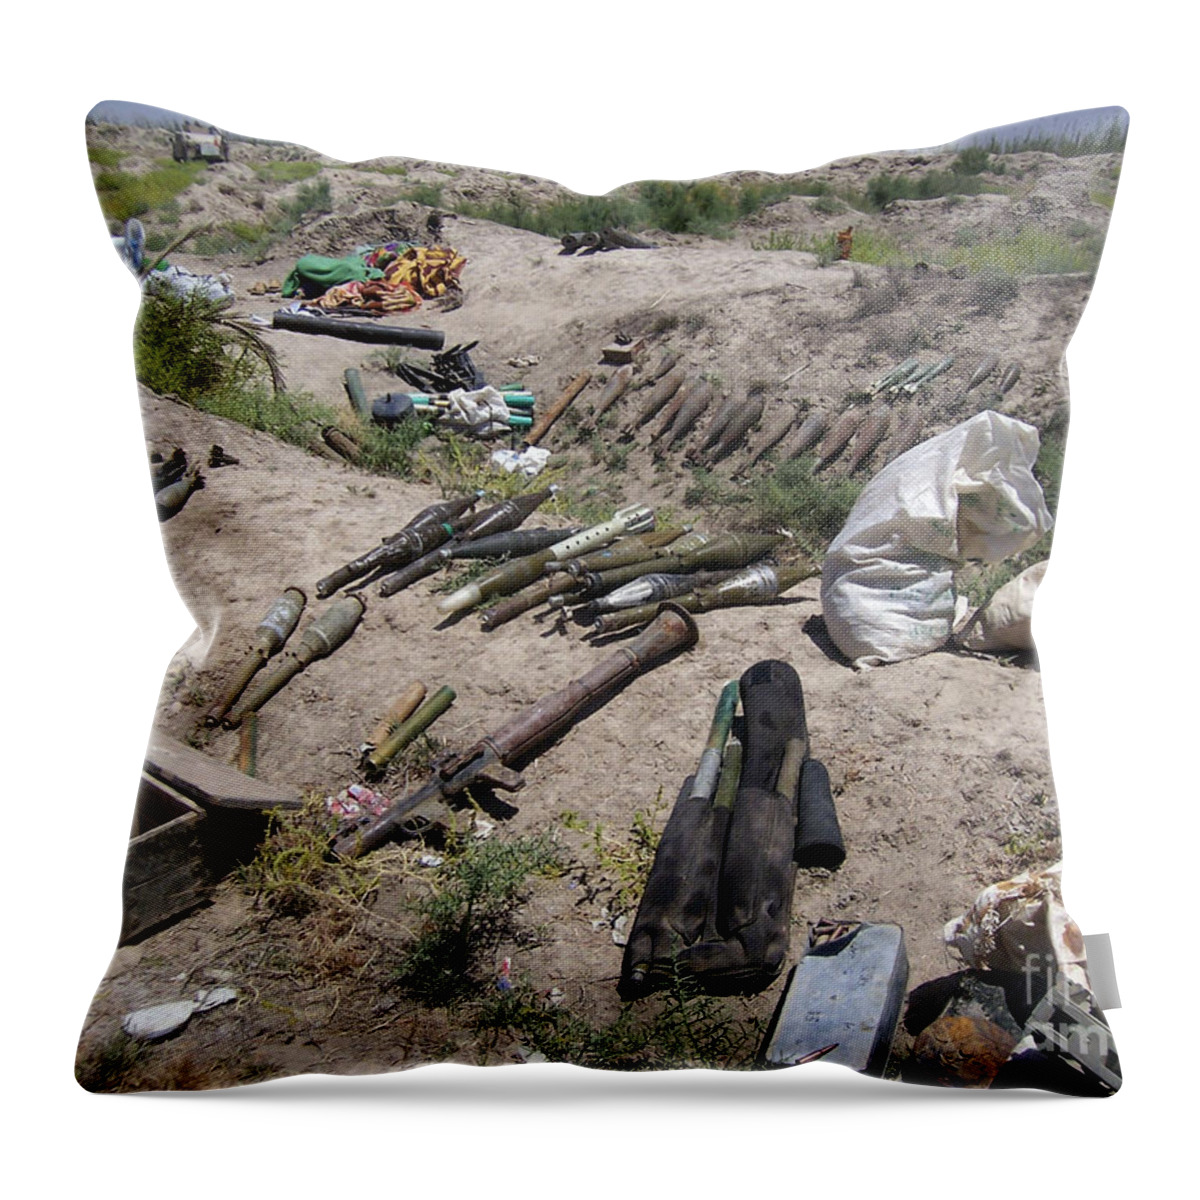 Ammo Throw Pillow featuring the photograph Weapons Caches by Stocktrek Images